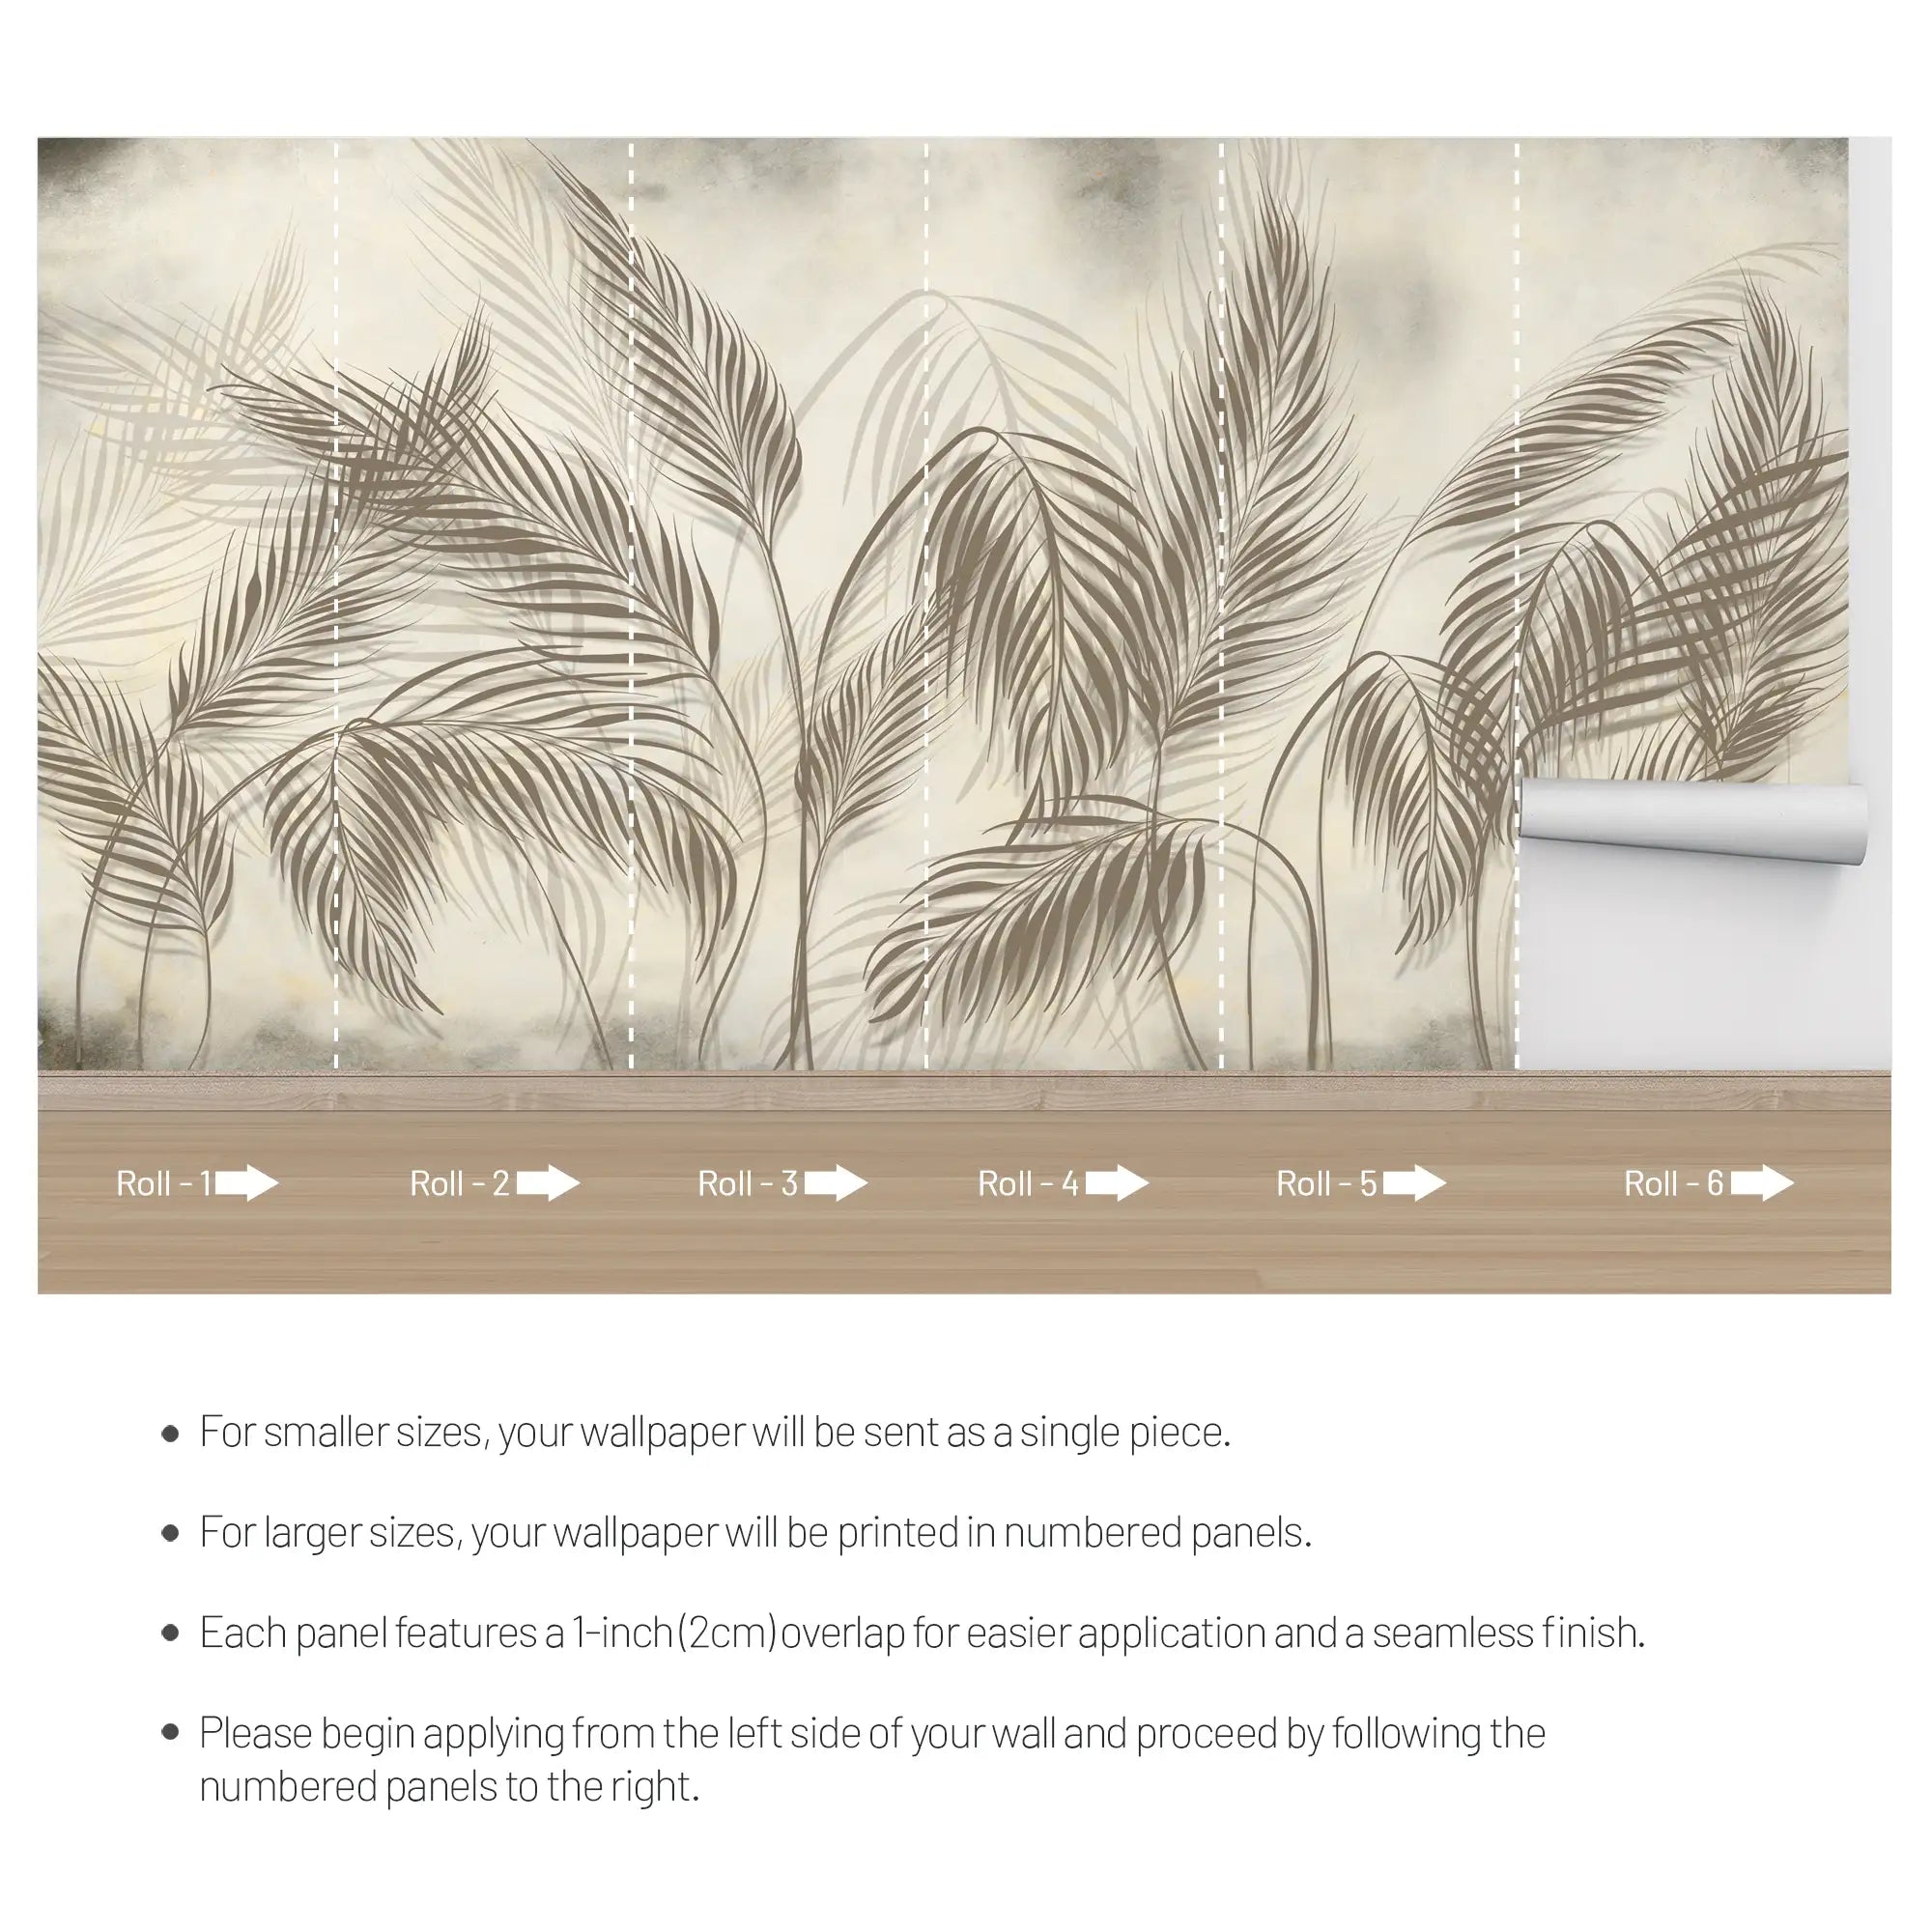 3203 / Panorama Palm Design, Wallpaper for Bedroom, Boho Wallpaper Stick and Peel, Nature Inspired, Wall Murals Peel and Stick, Tropical Accent - Artevella